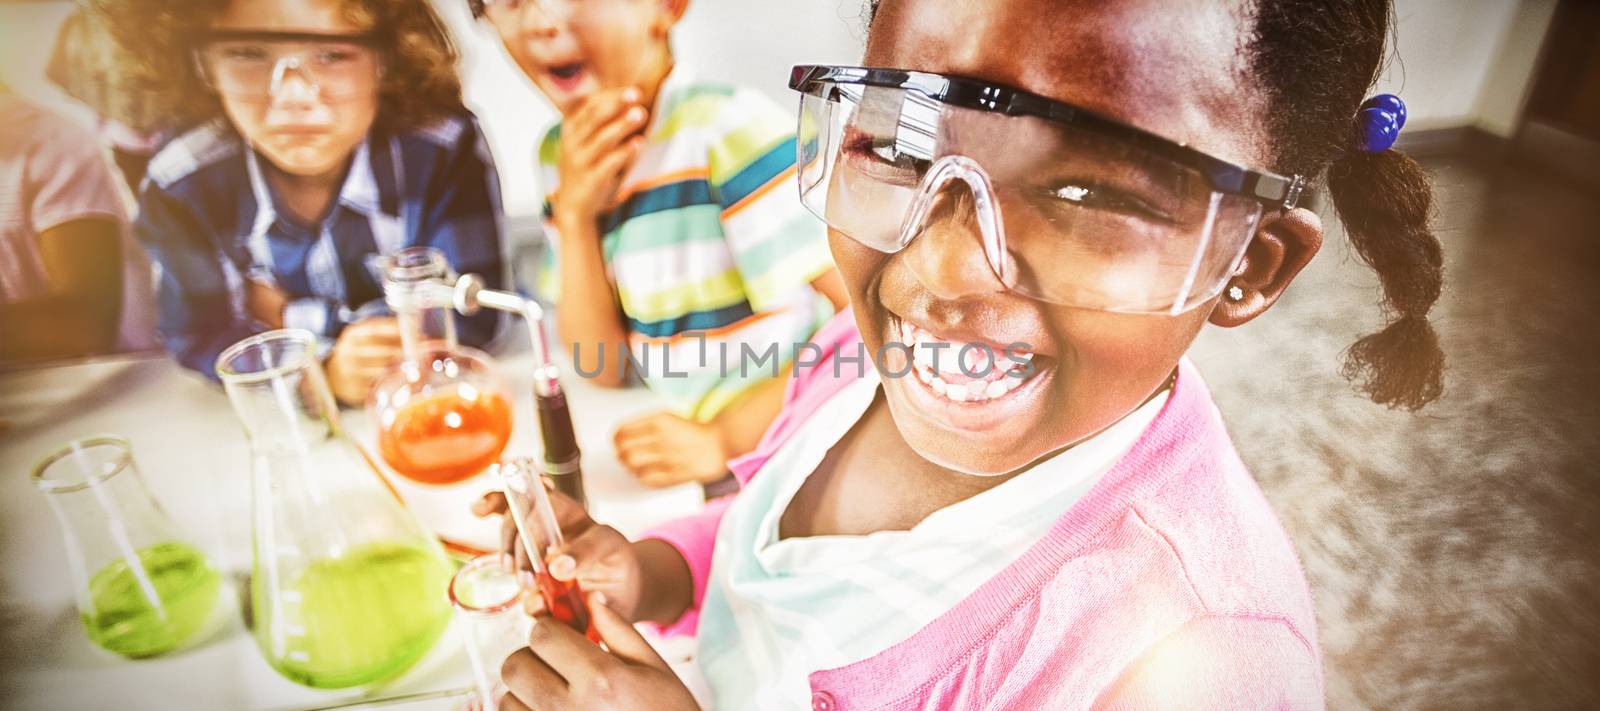 Kids doing a chemical experiment in laboratory by Wavebreakmedia